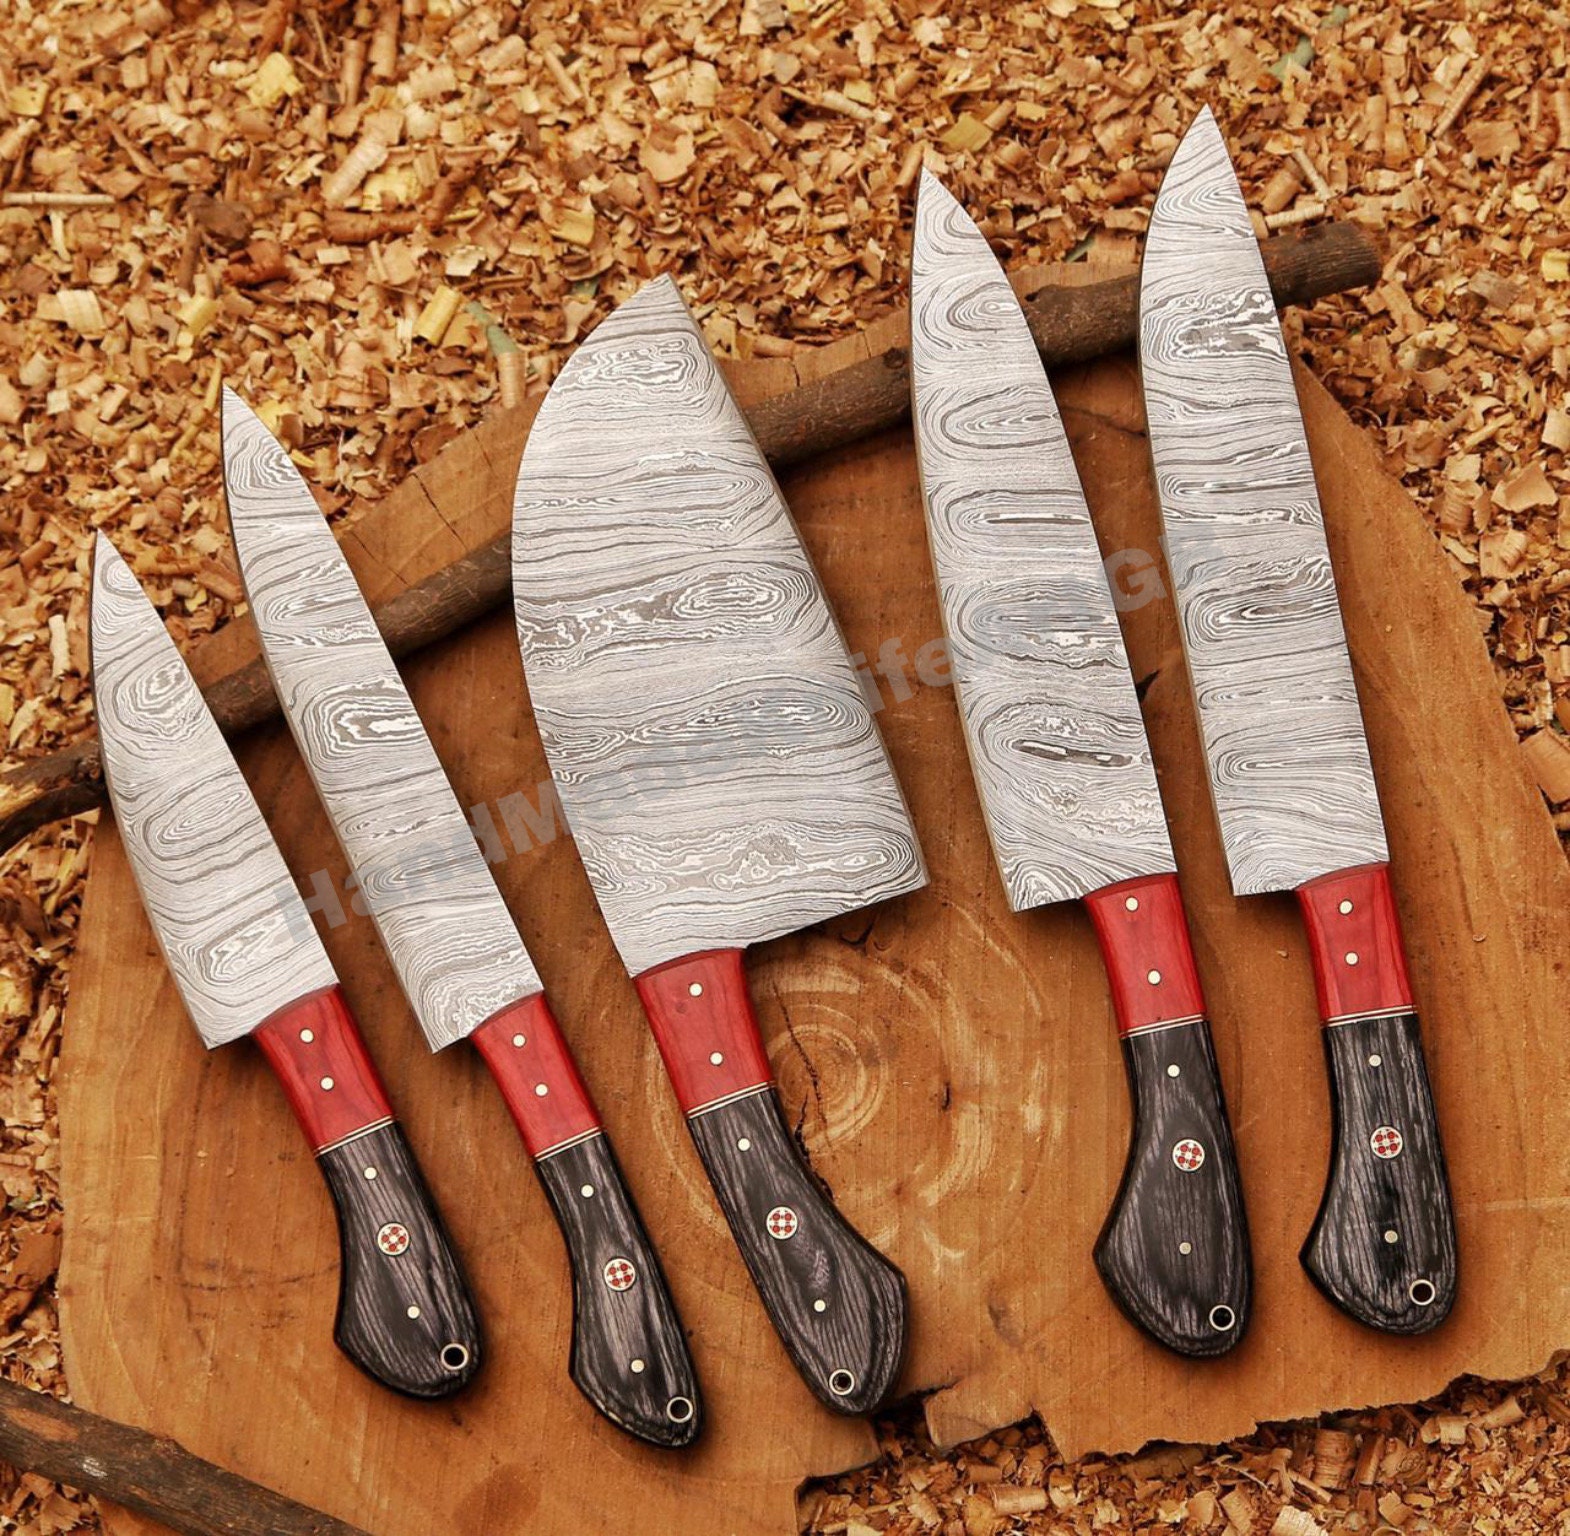 5 Pieces Damascus steel Hammered kitchen knife set, Custom made hand forged  Damascus steel full tang blade, Overall 36 inches Length of Hammered  Damascus sharp knives, Goat suede Leather Roll sheath 